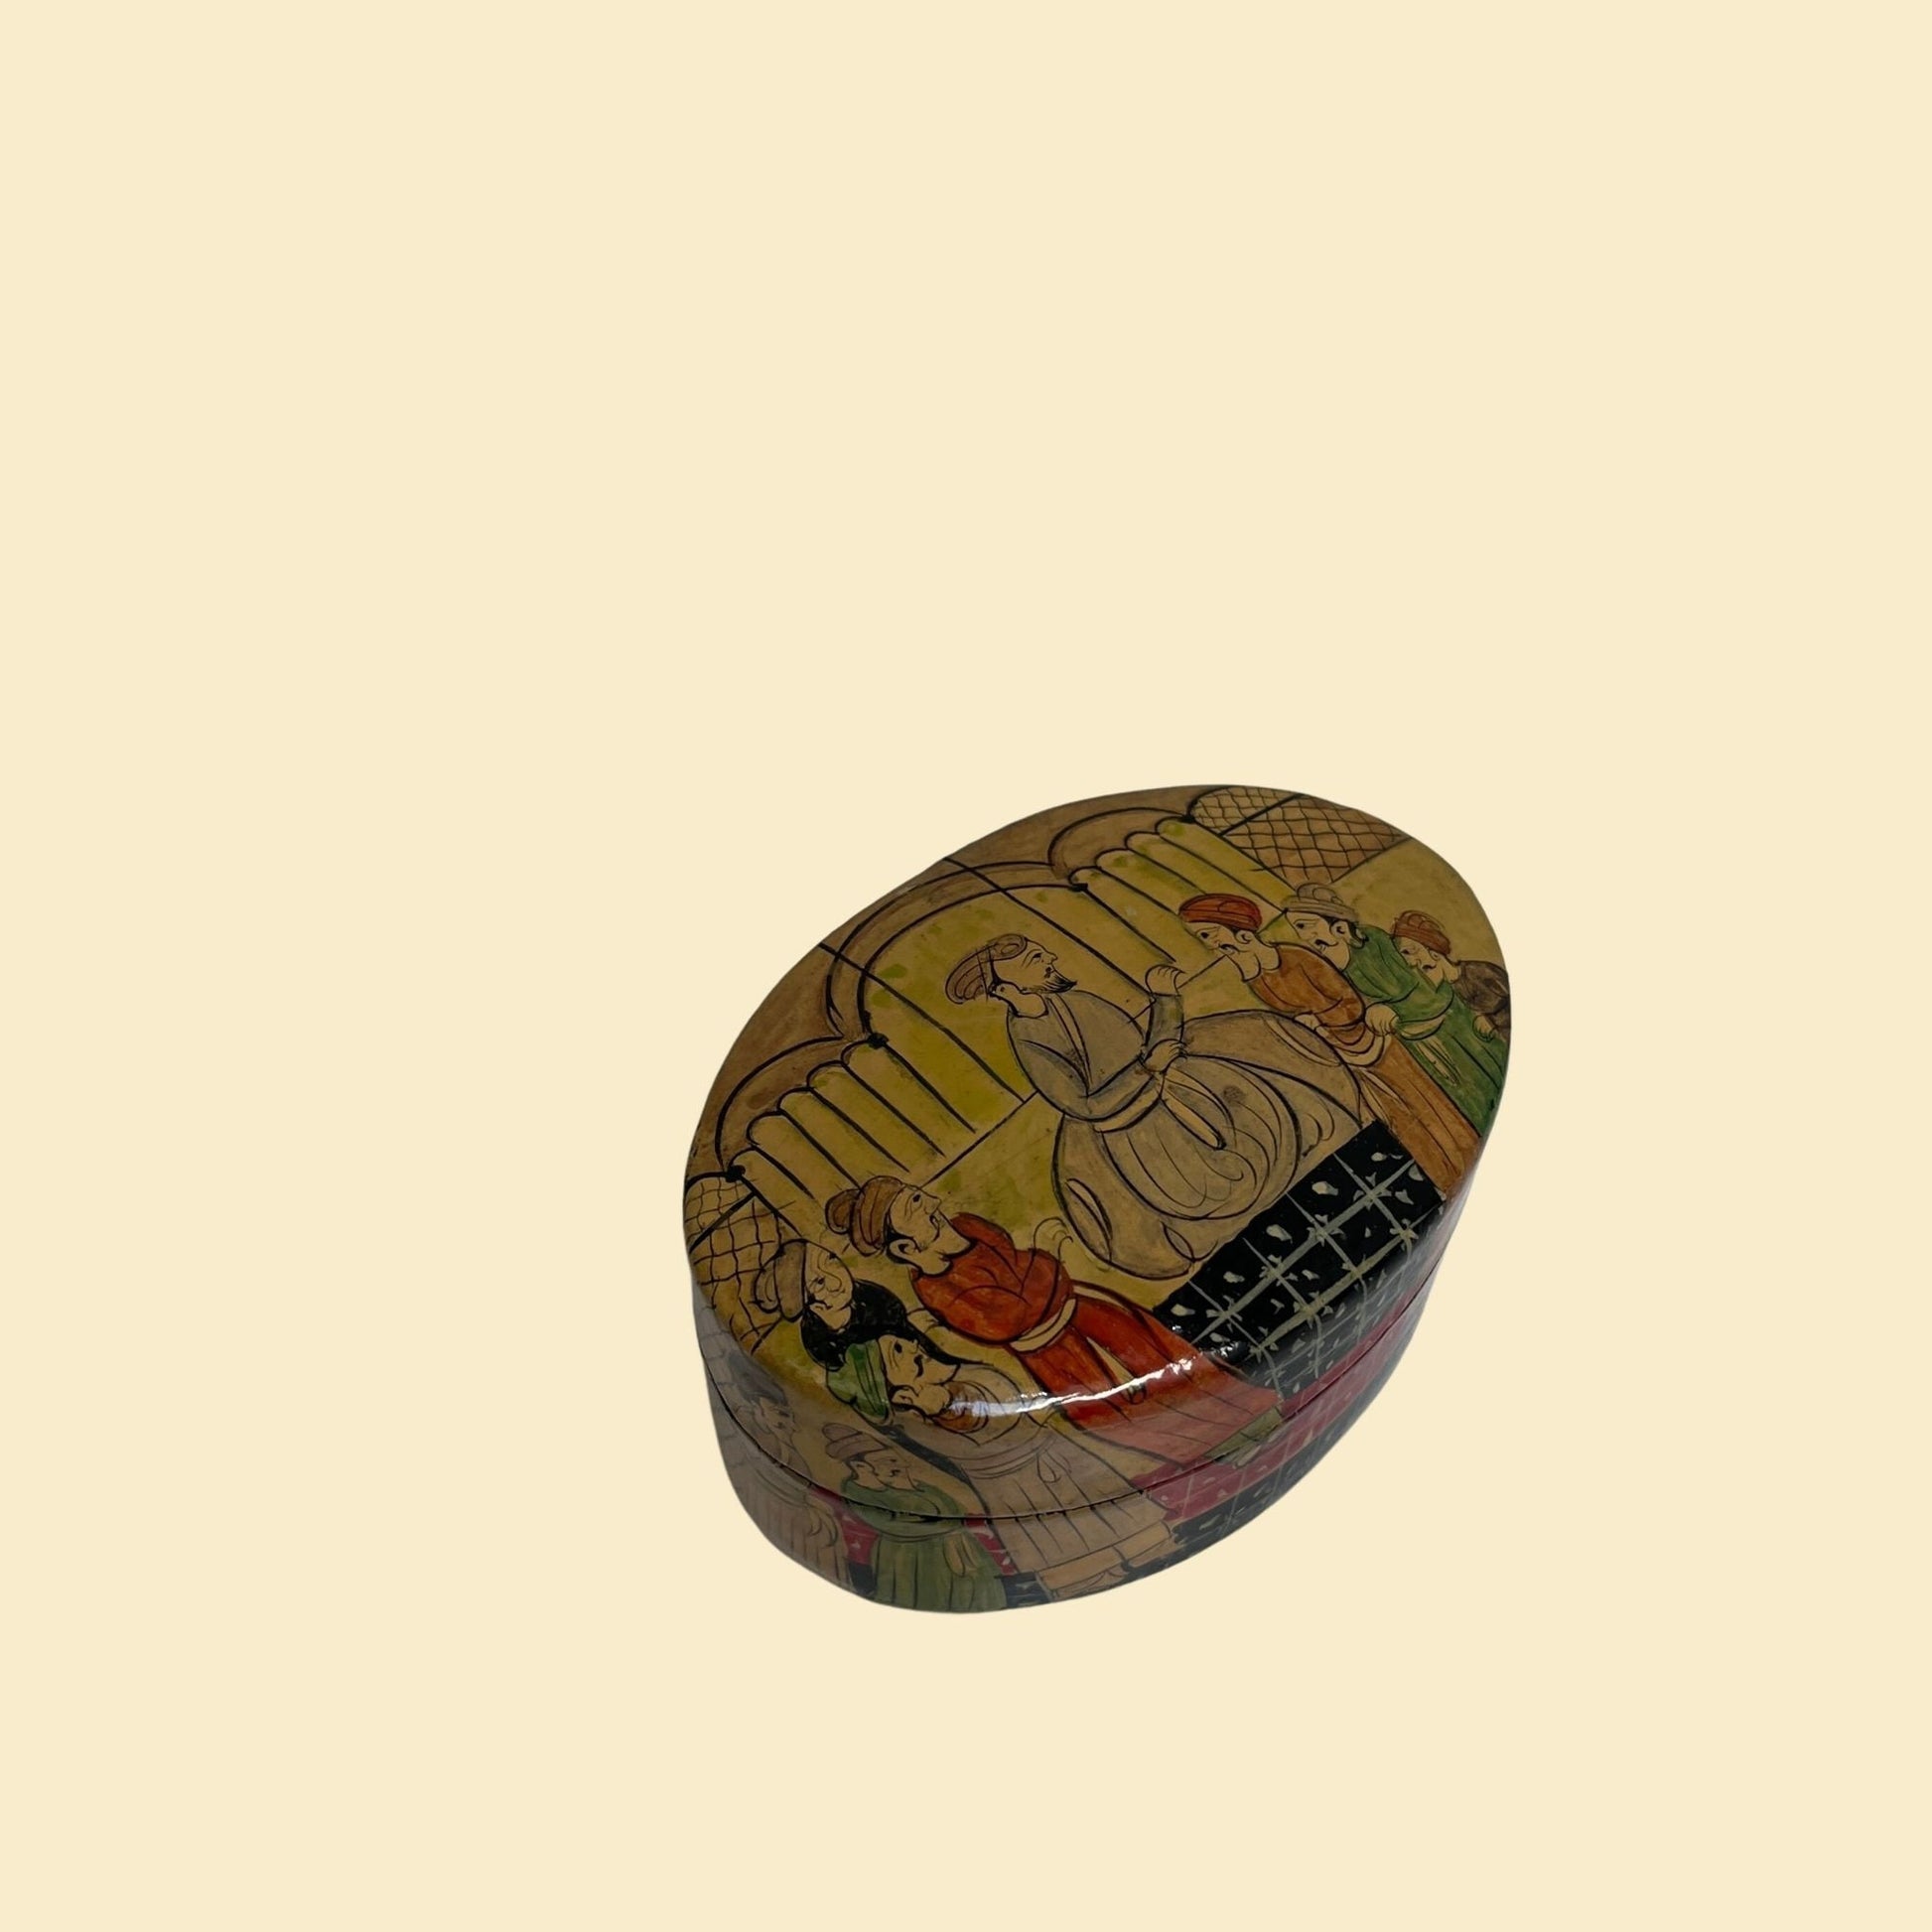 Vintage hand painted lacquer box made in India, 1960s Kashmir India oval shaped trinket box